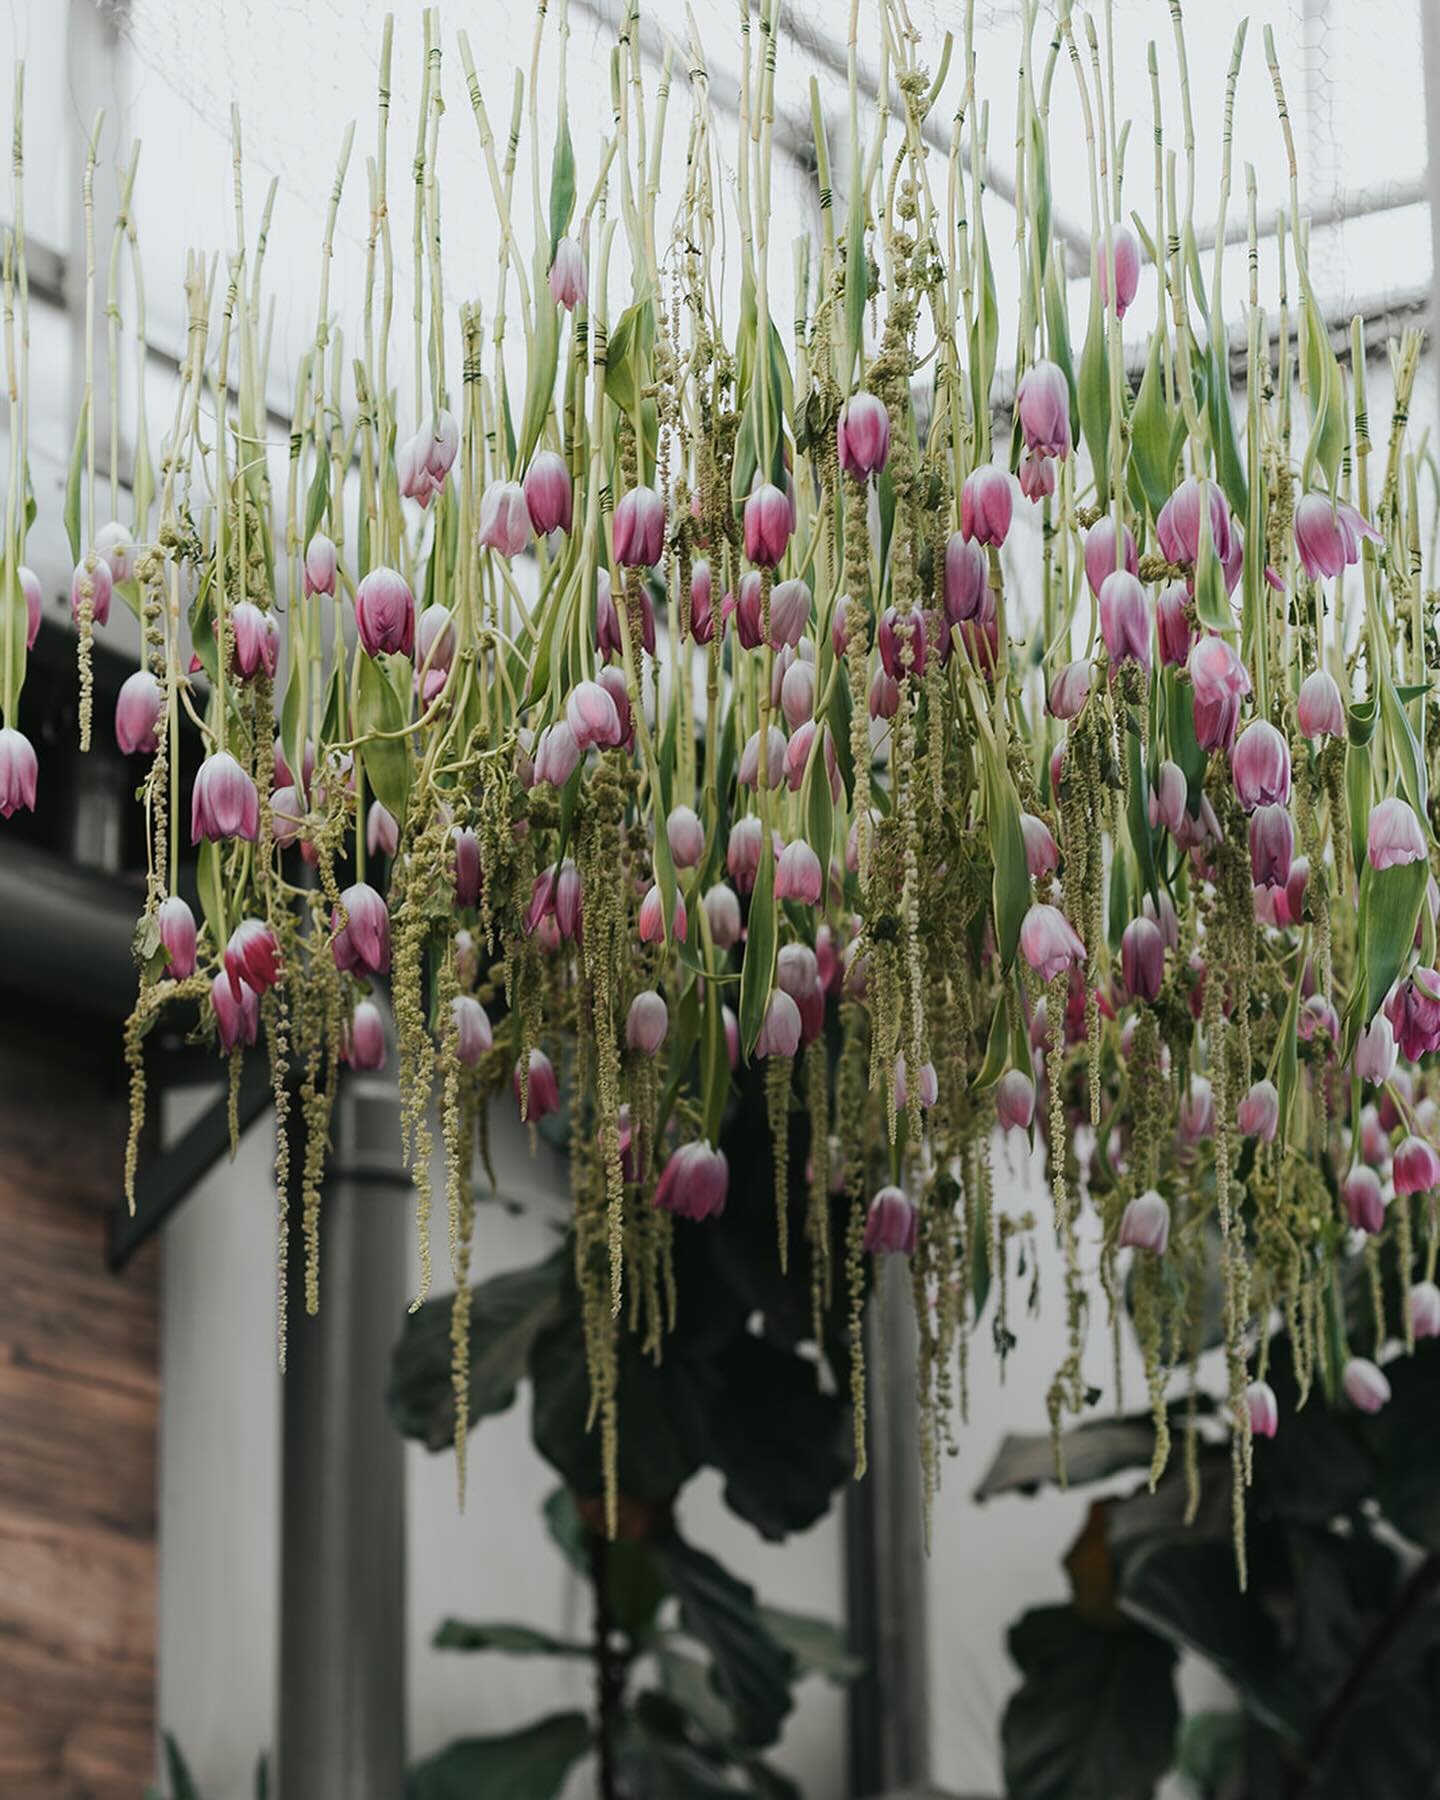 Scenes from our last spring install 🌷Hundreds of tulips suspended from the ceiling. This year we&rsquo;re cooking up something even bigger &bull; @jenniferleigh.photos